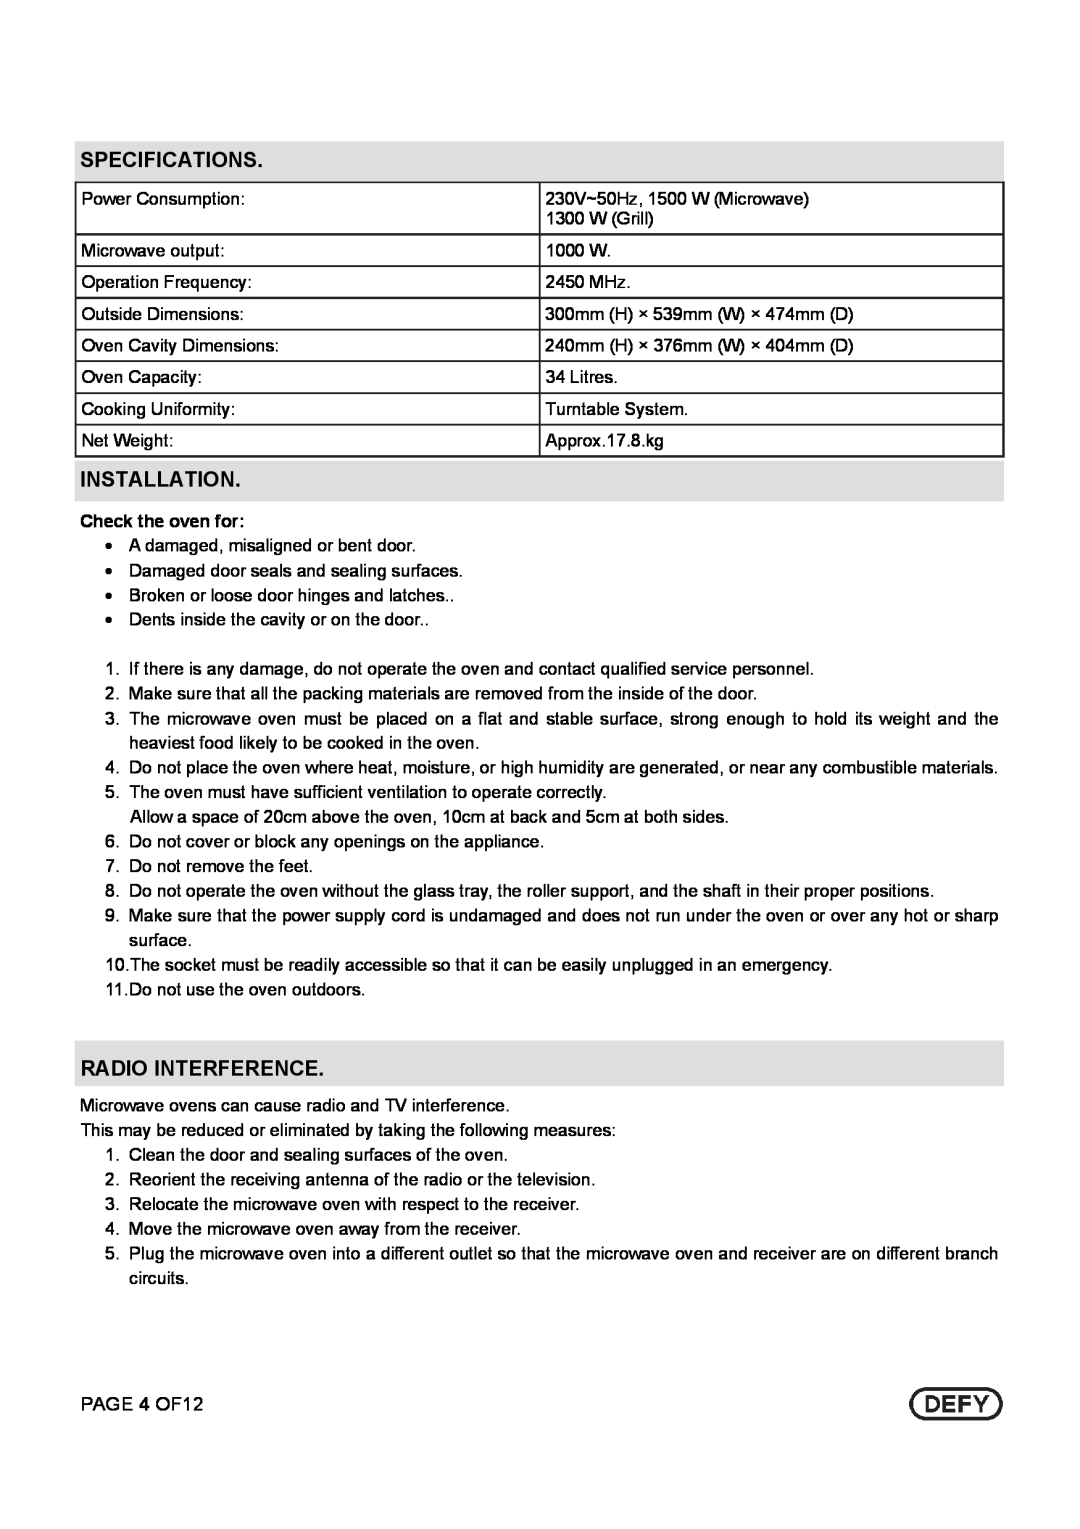 Defy Appliances DMO 343 owner manual Specifications, Installation, Radio Interference, PAGE 4 OF12, Check the oven for 